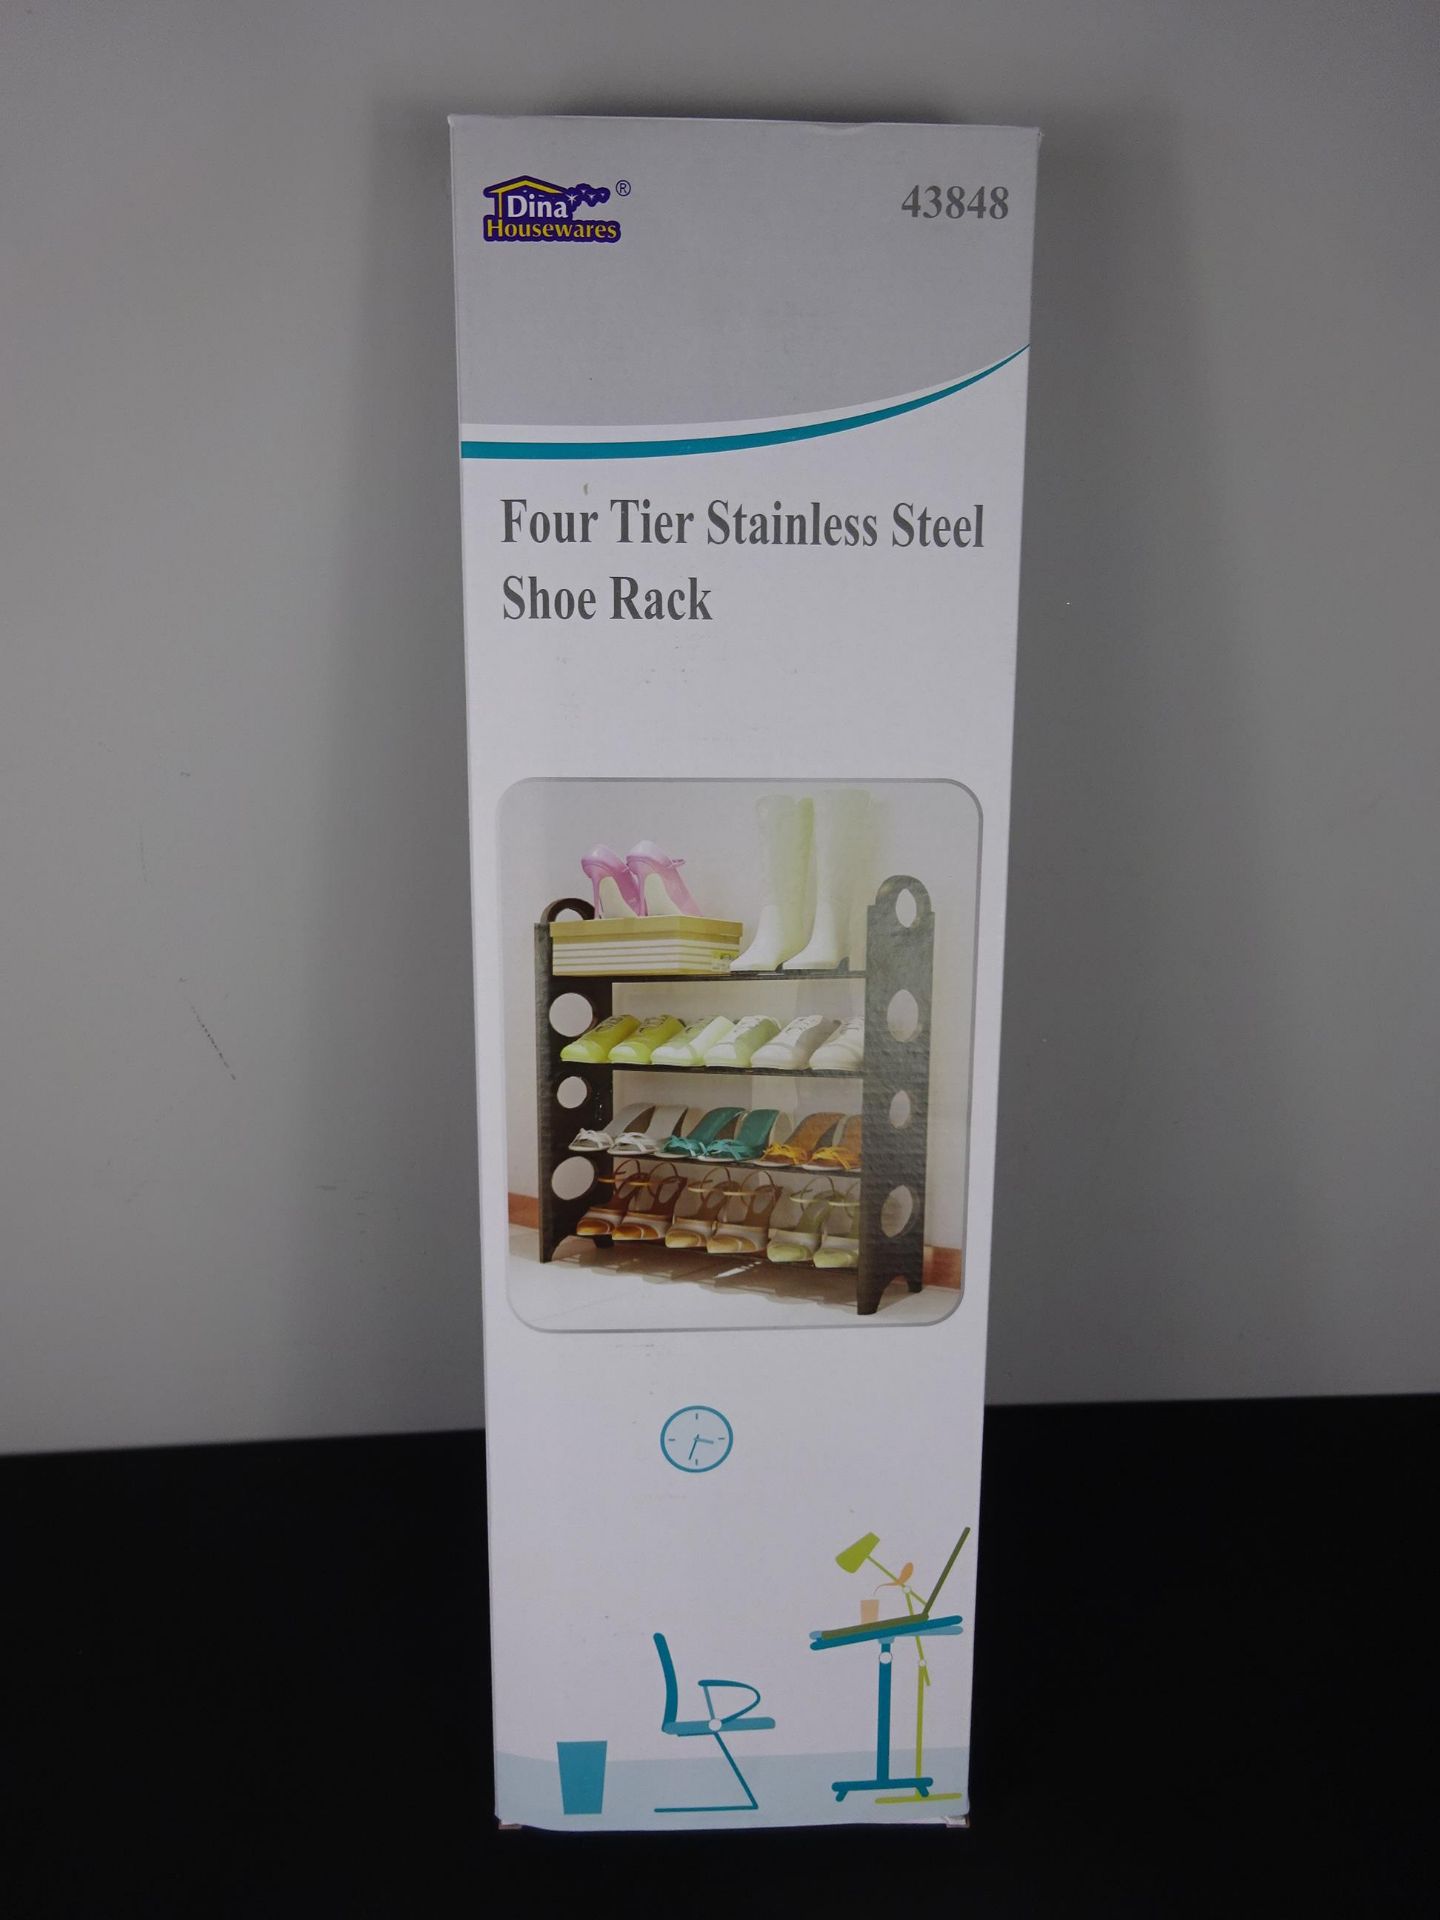 New Four Tier Stainless Steel Shoe Rack